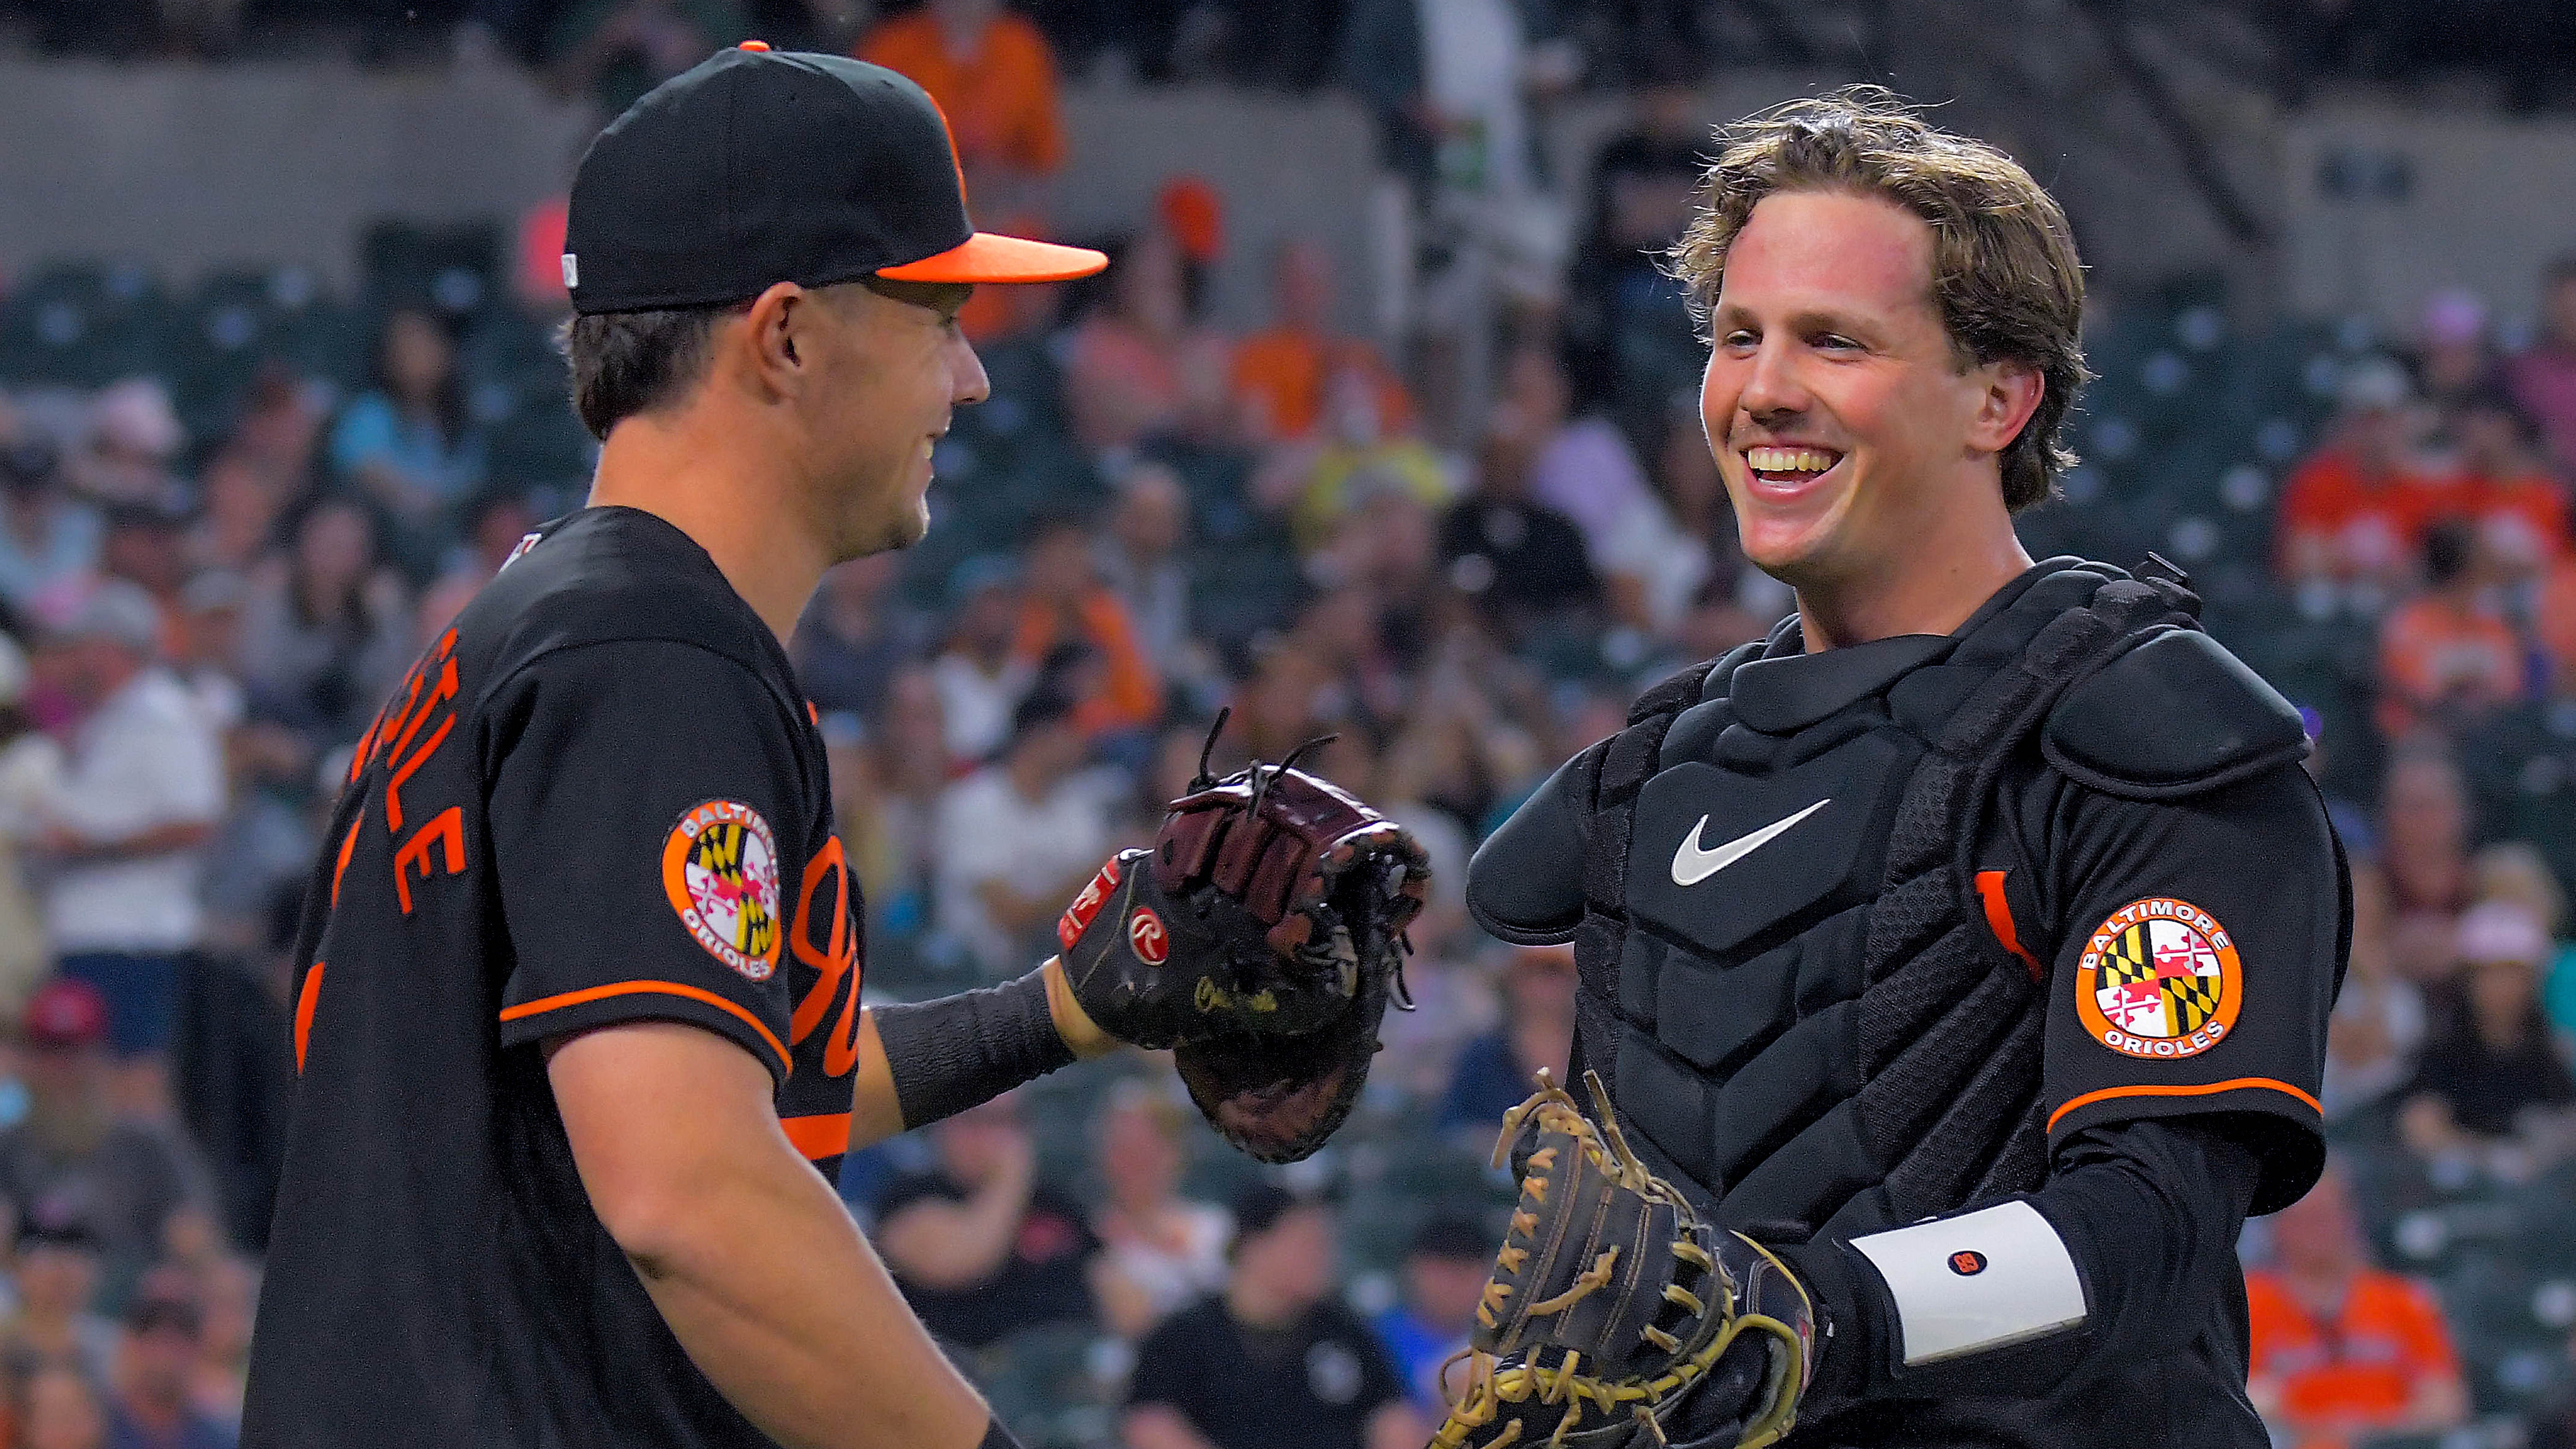 2022 Gold Glove Award announcement: What you need to know about